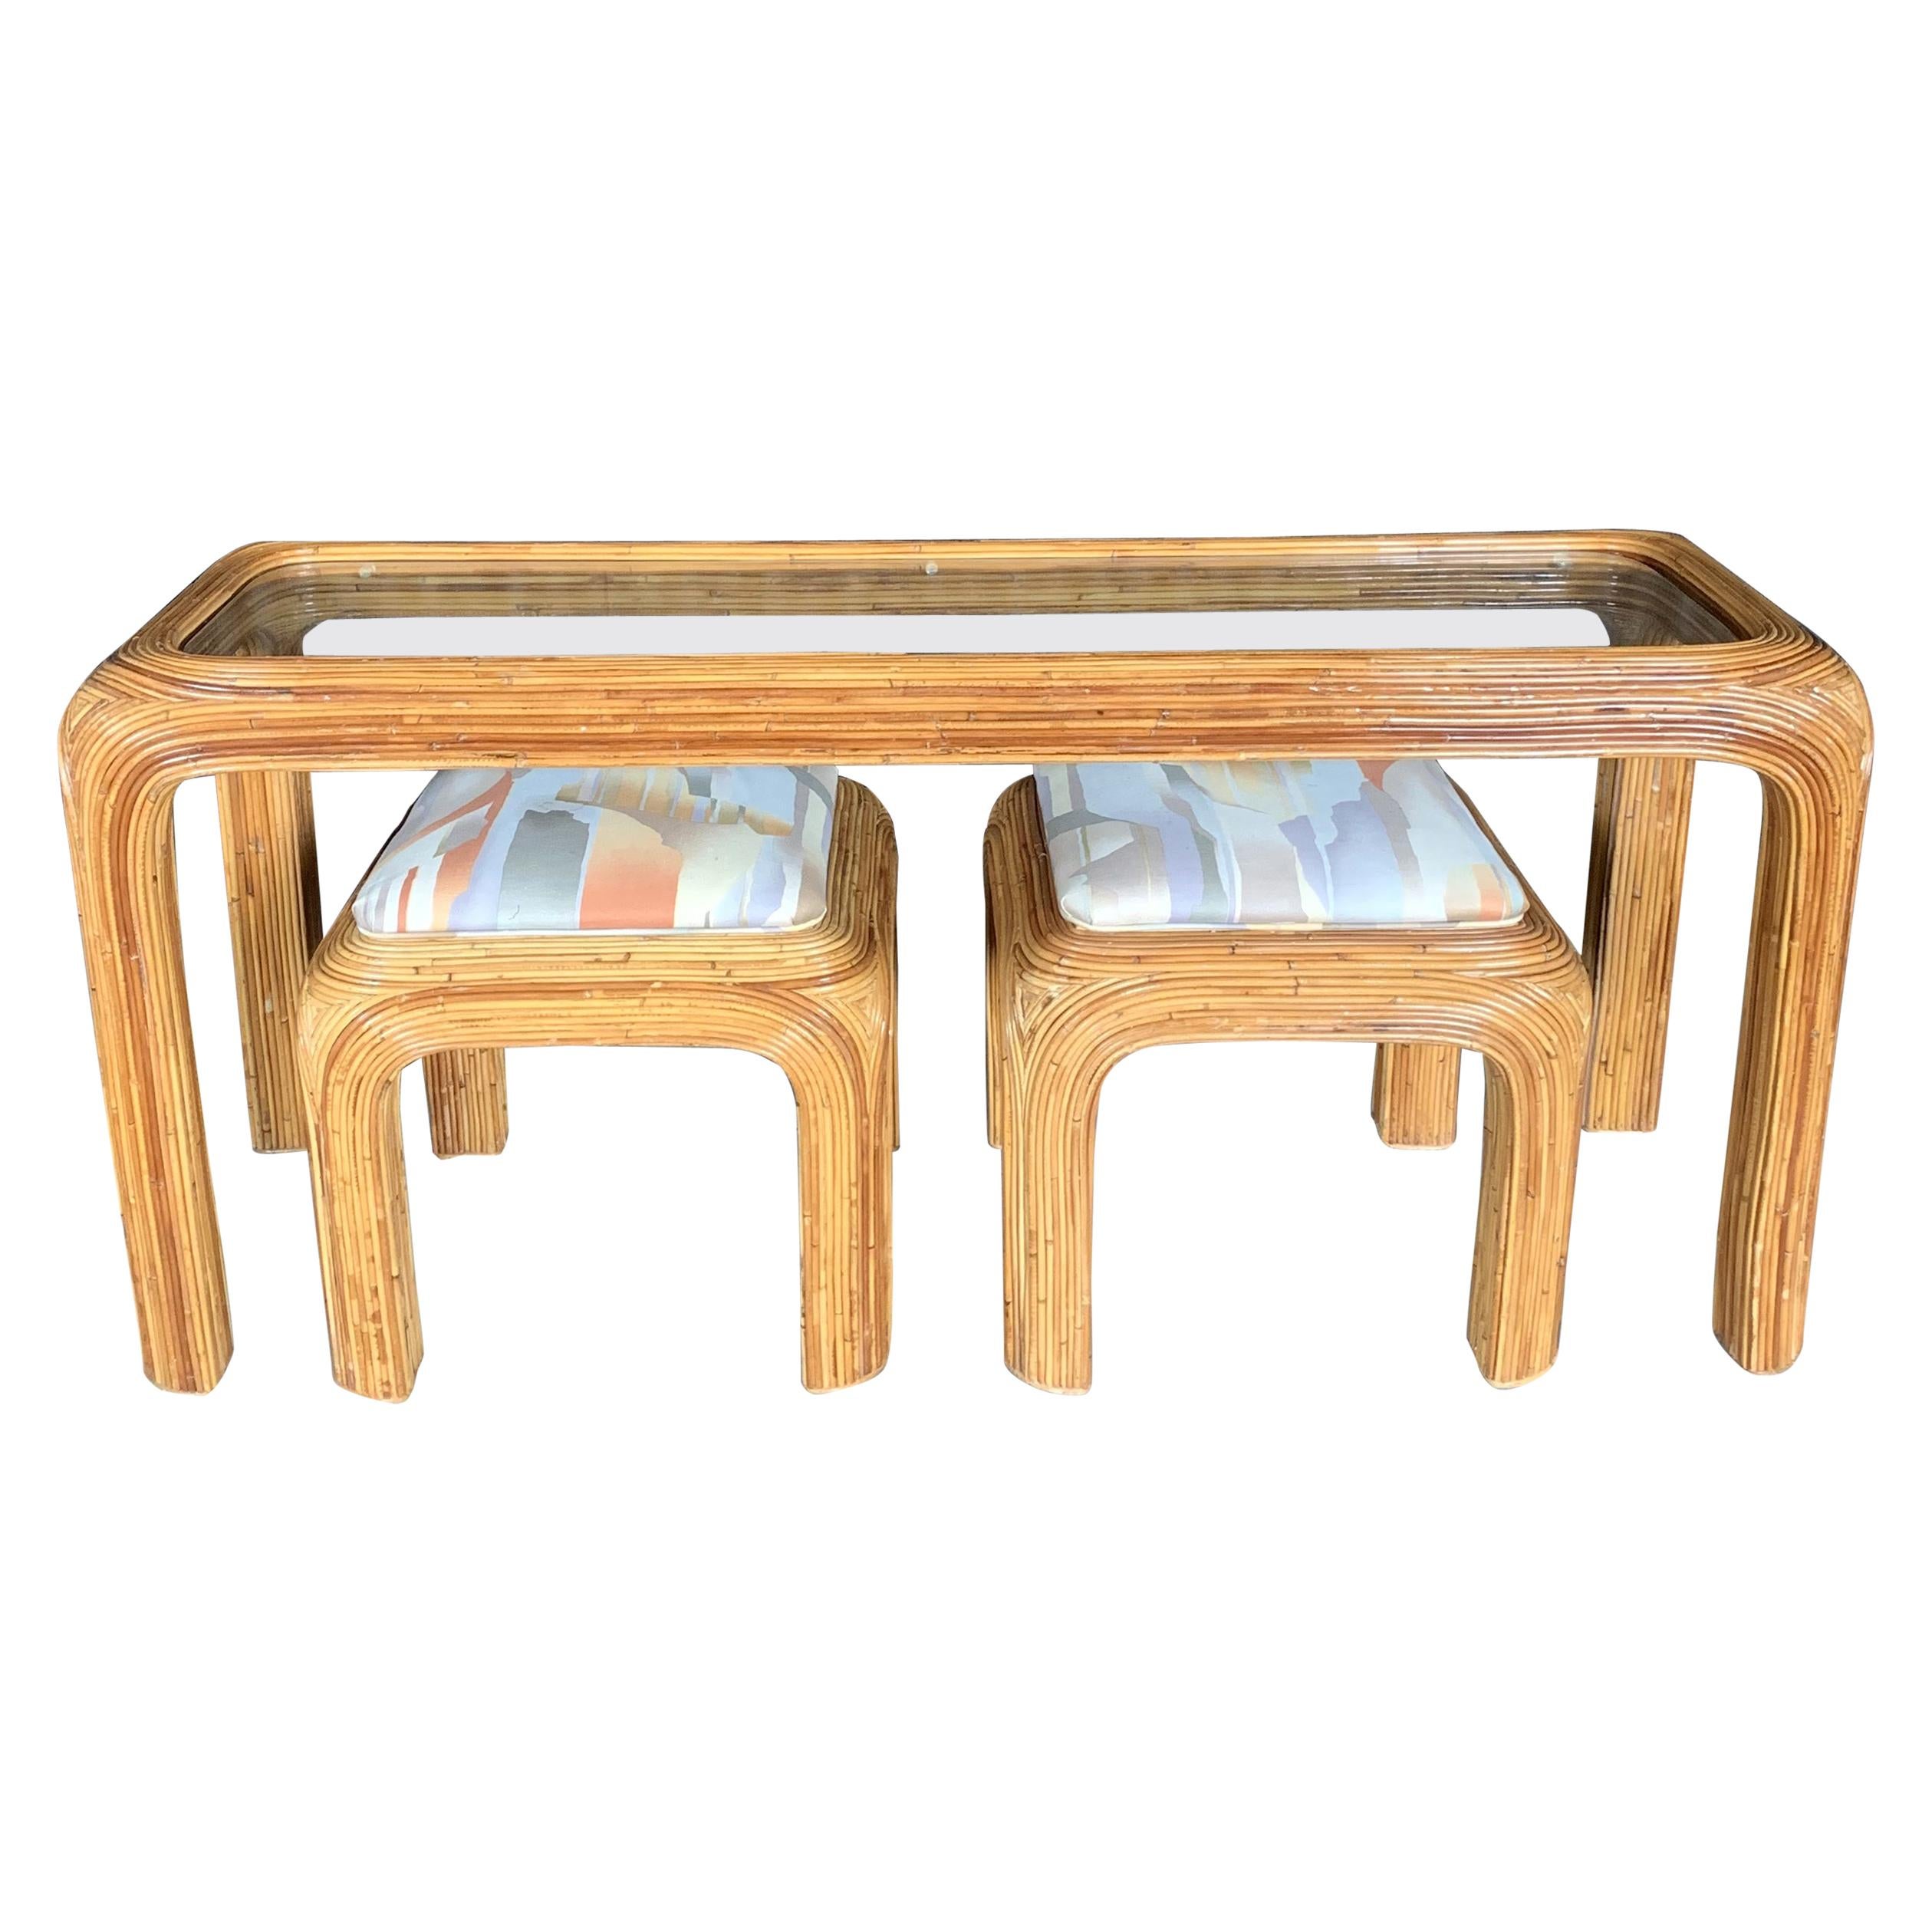 Pencil Reed Glass Shelf Console with Two Coordinating Benches